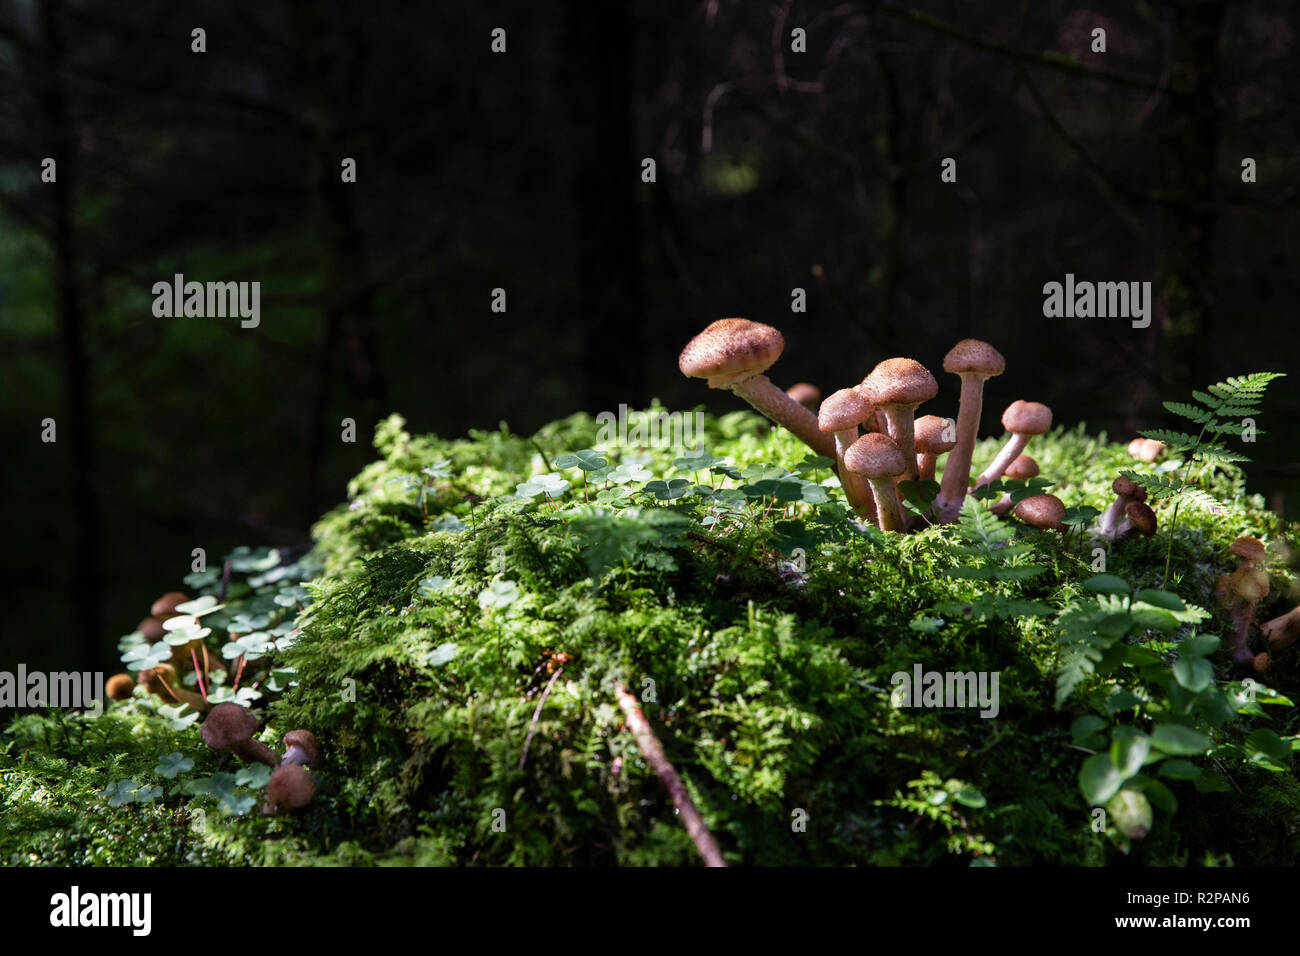 Cluster of mushrooms lit by the sun, black background, dark forest Stock Photo